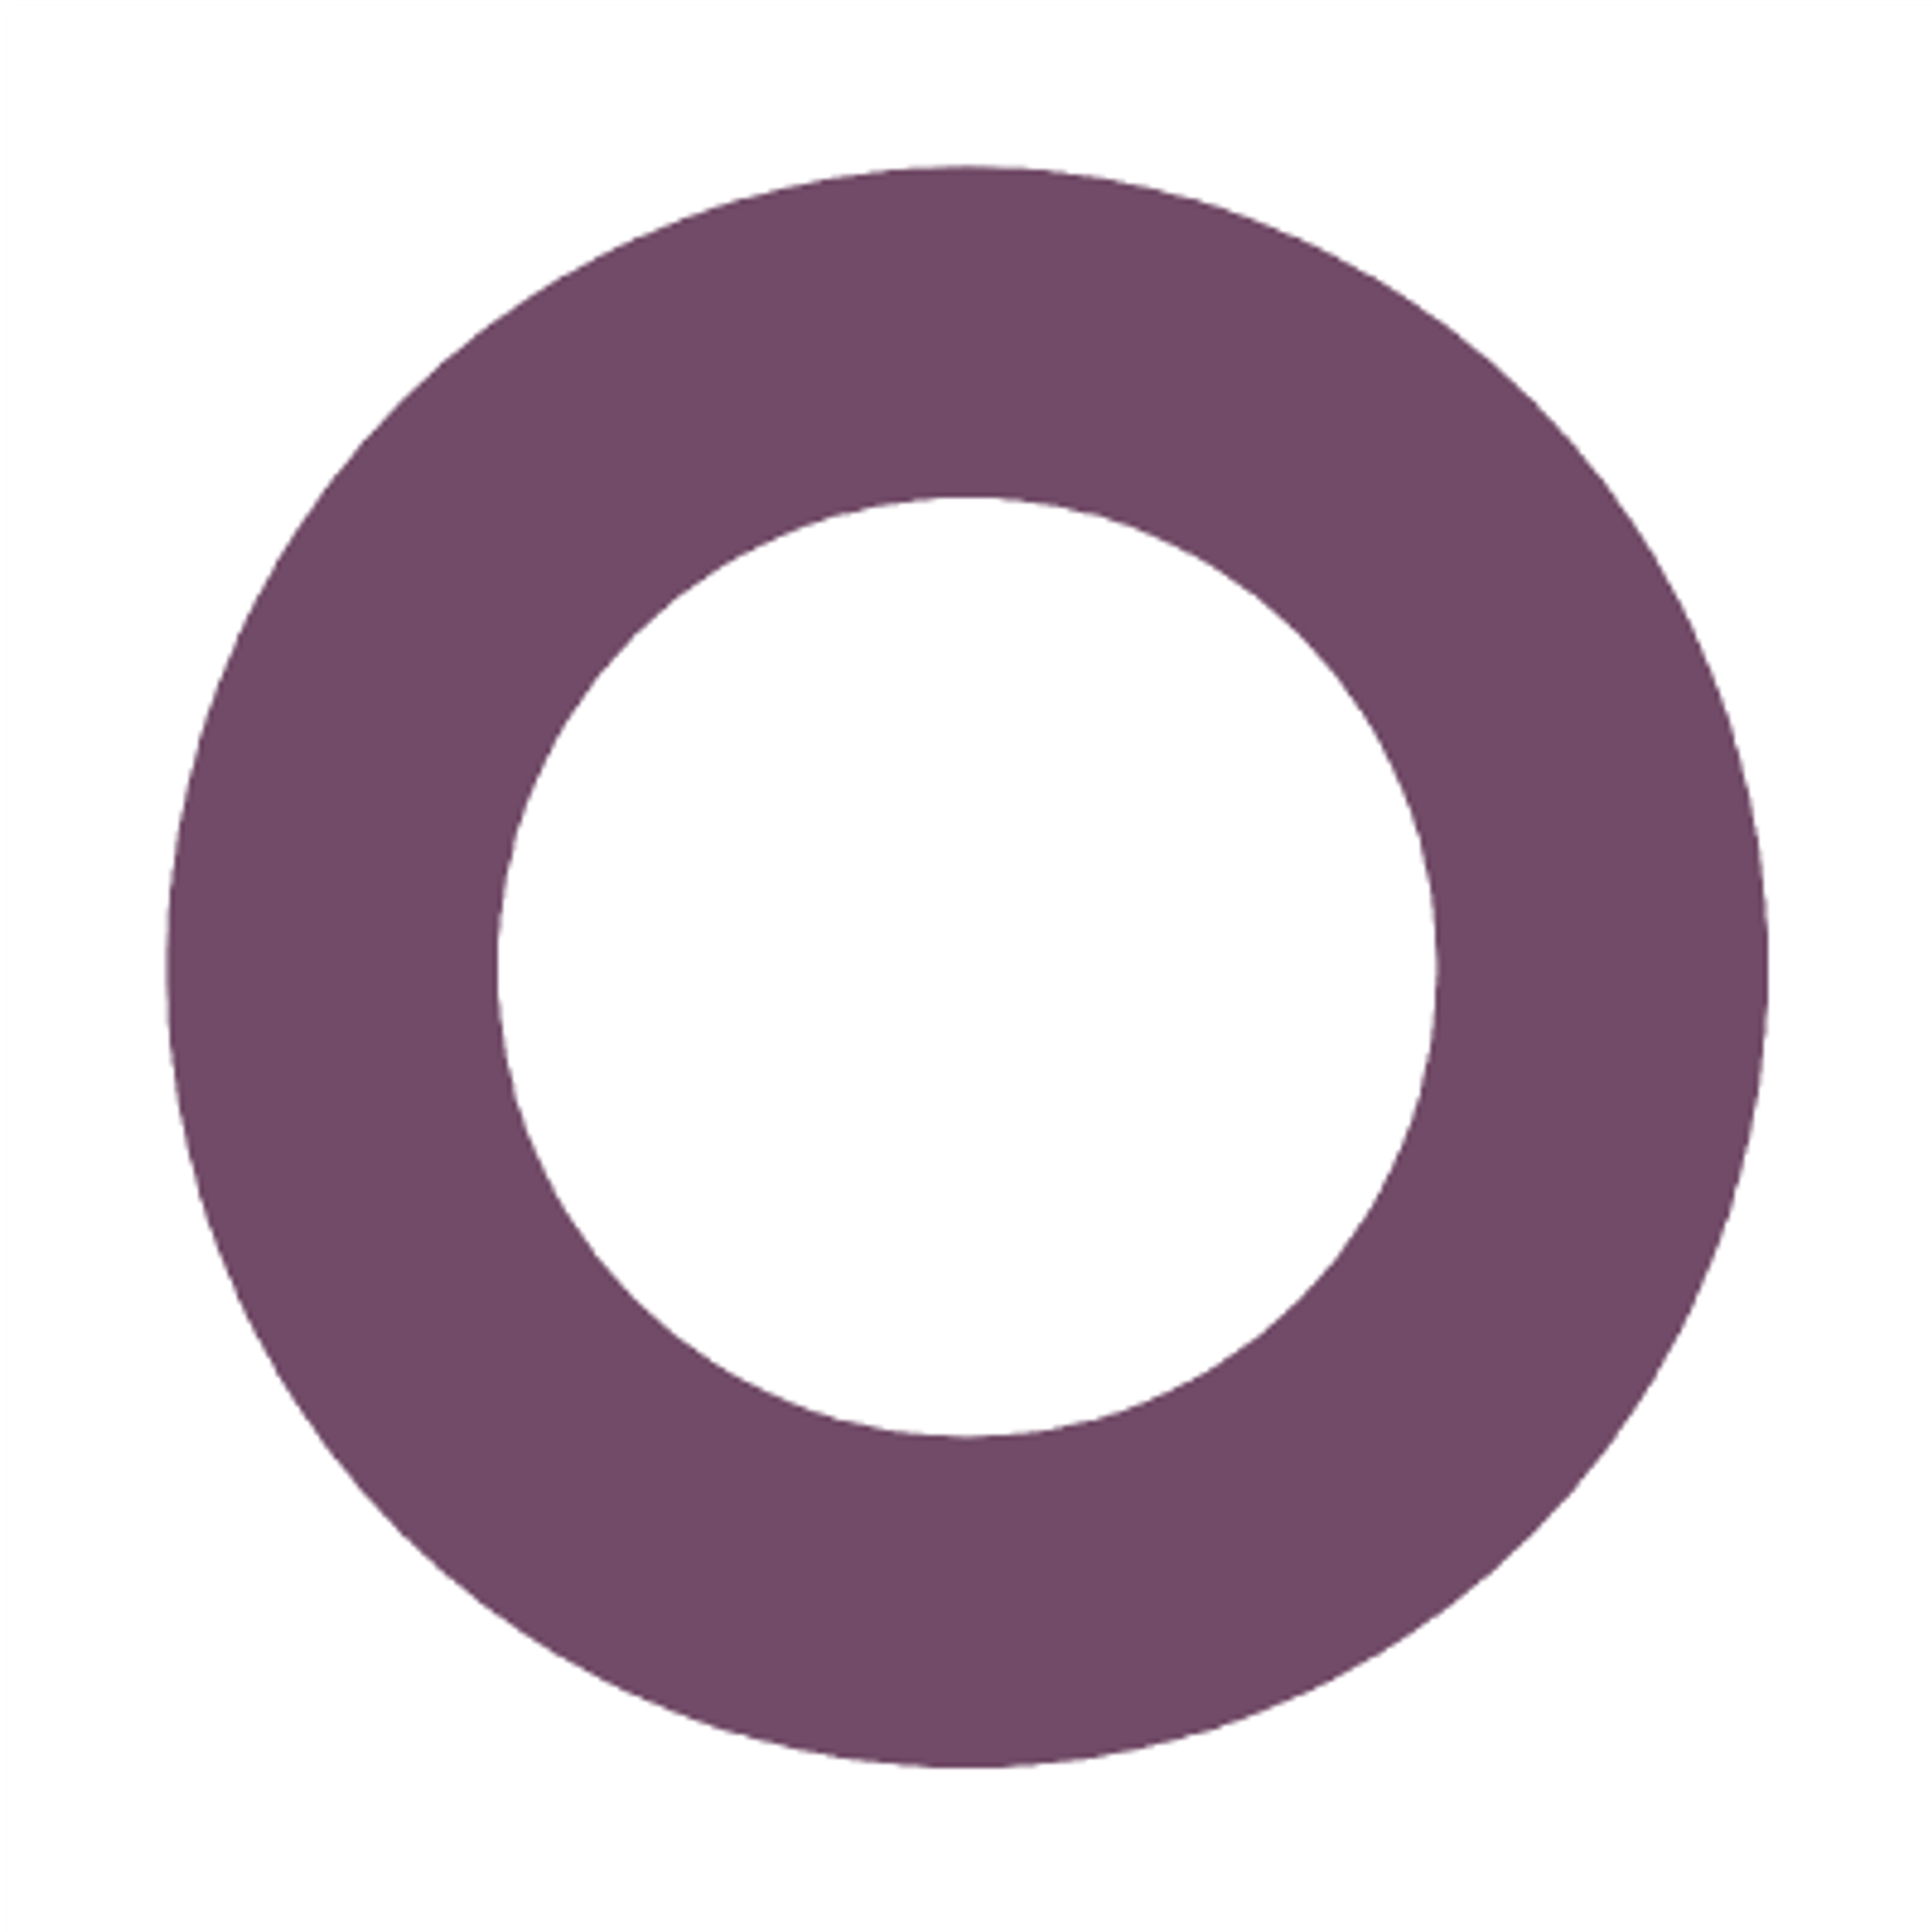 Support or discourage README.md files for module's description · Issue #48151 · odoo/odoo